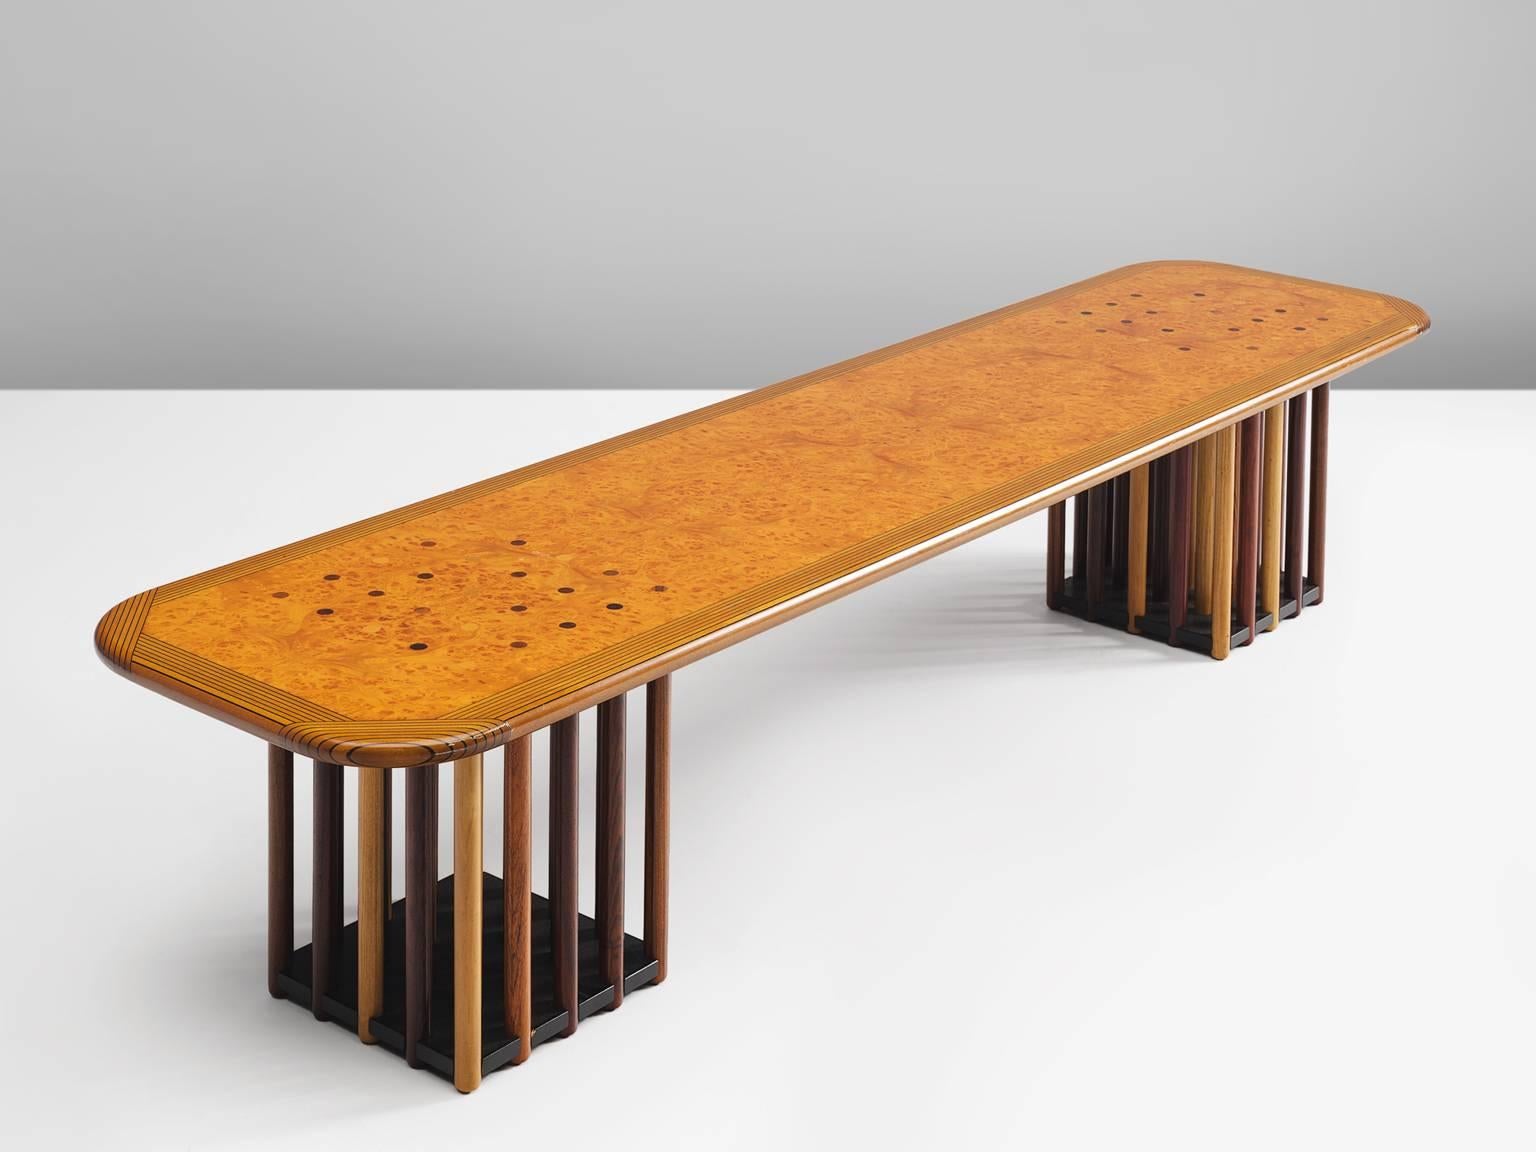 Afra Scarpa and Tobia Scarpa, coffee table, maple burl, birch, beech, oak, fruitwood, Italy, circa 1975

This extraordinary long table features two feet that exist of circular rods made out of different types of wood. The ends of the circular rods